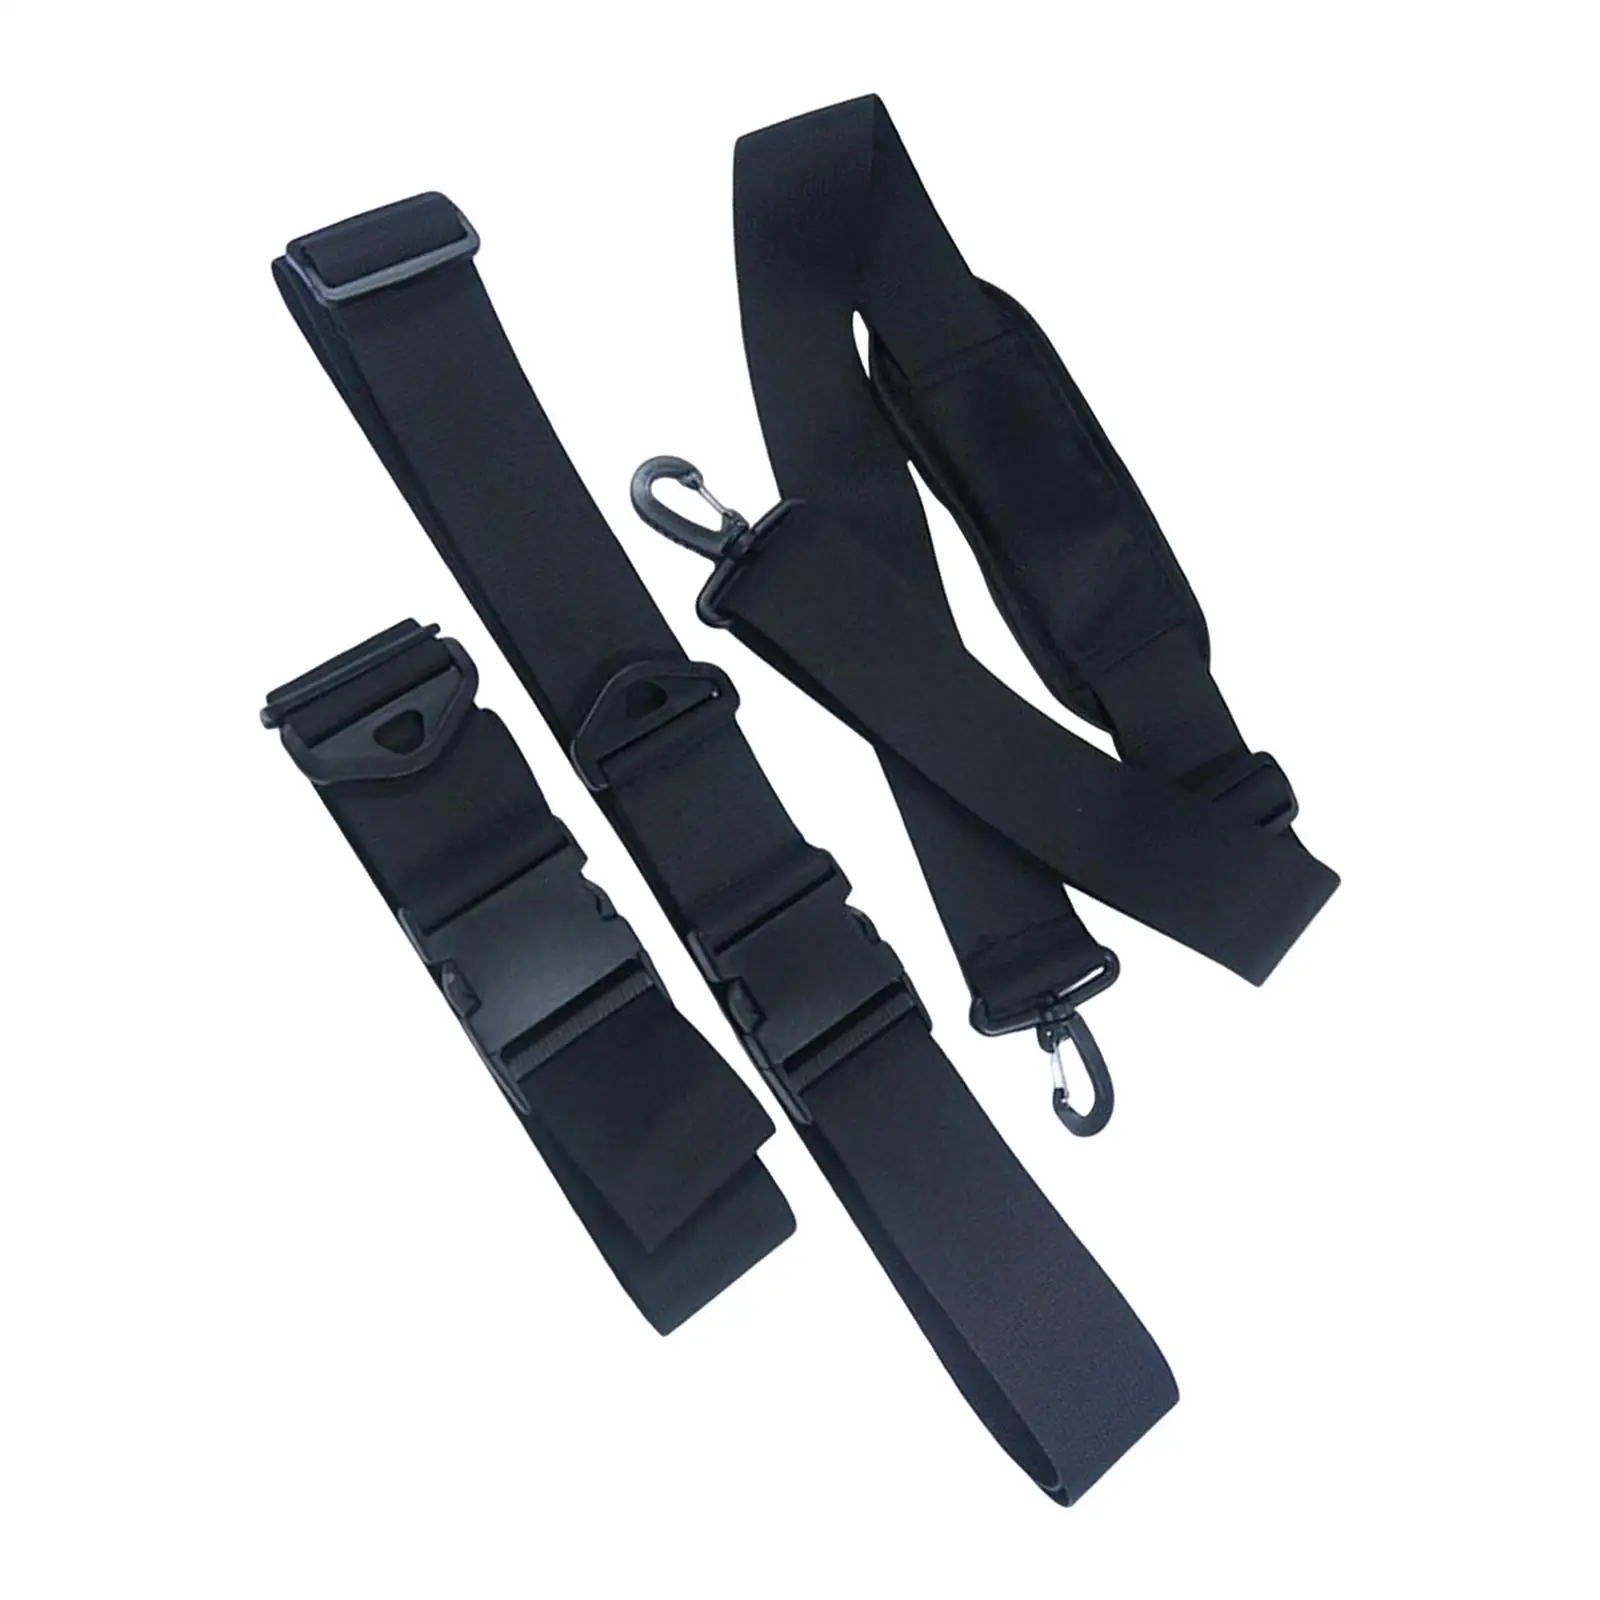 Carrying Sling Carrier Universal Surfboard Beach Paddle Board Shoulder Strap